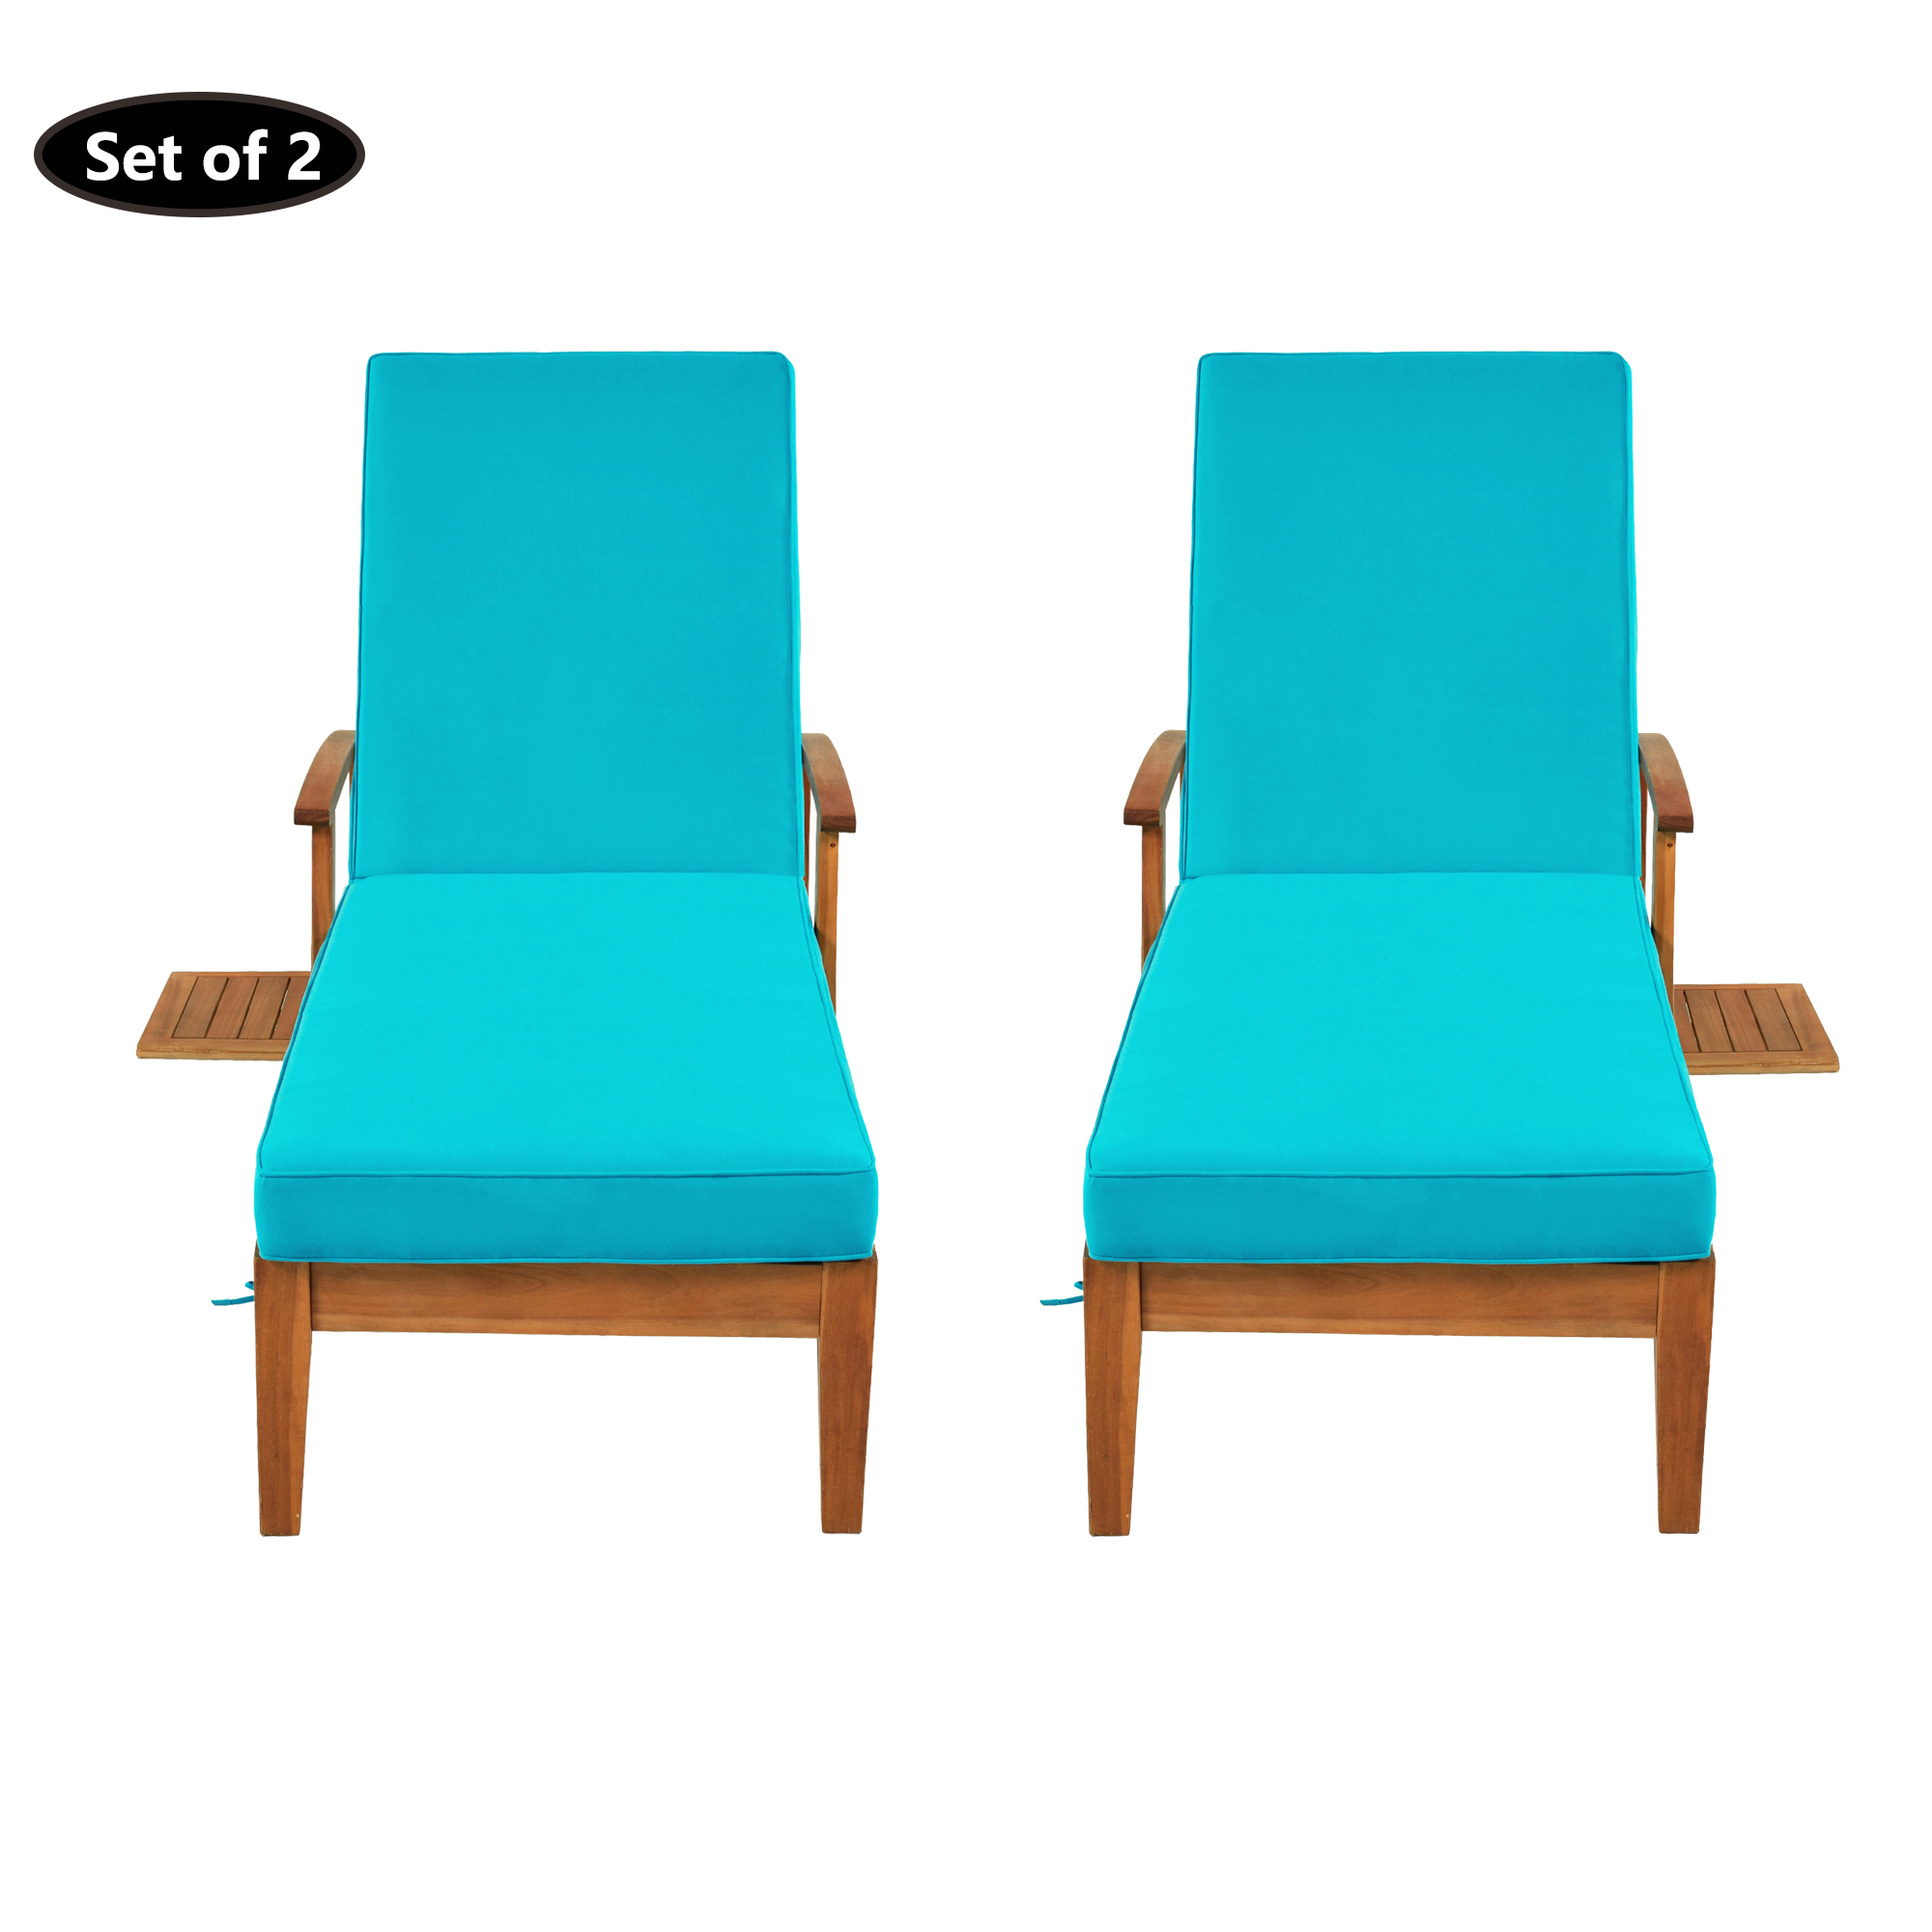 Sesslife Outdoor Solid Wood Chaise Lounge, 2 Piece Patio Brown Finish Reclining Chair Furniture Set Beach Pool Adjustable Backrest Recliners with Blue Cushions - image 3 of 10